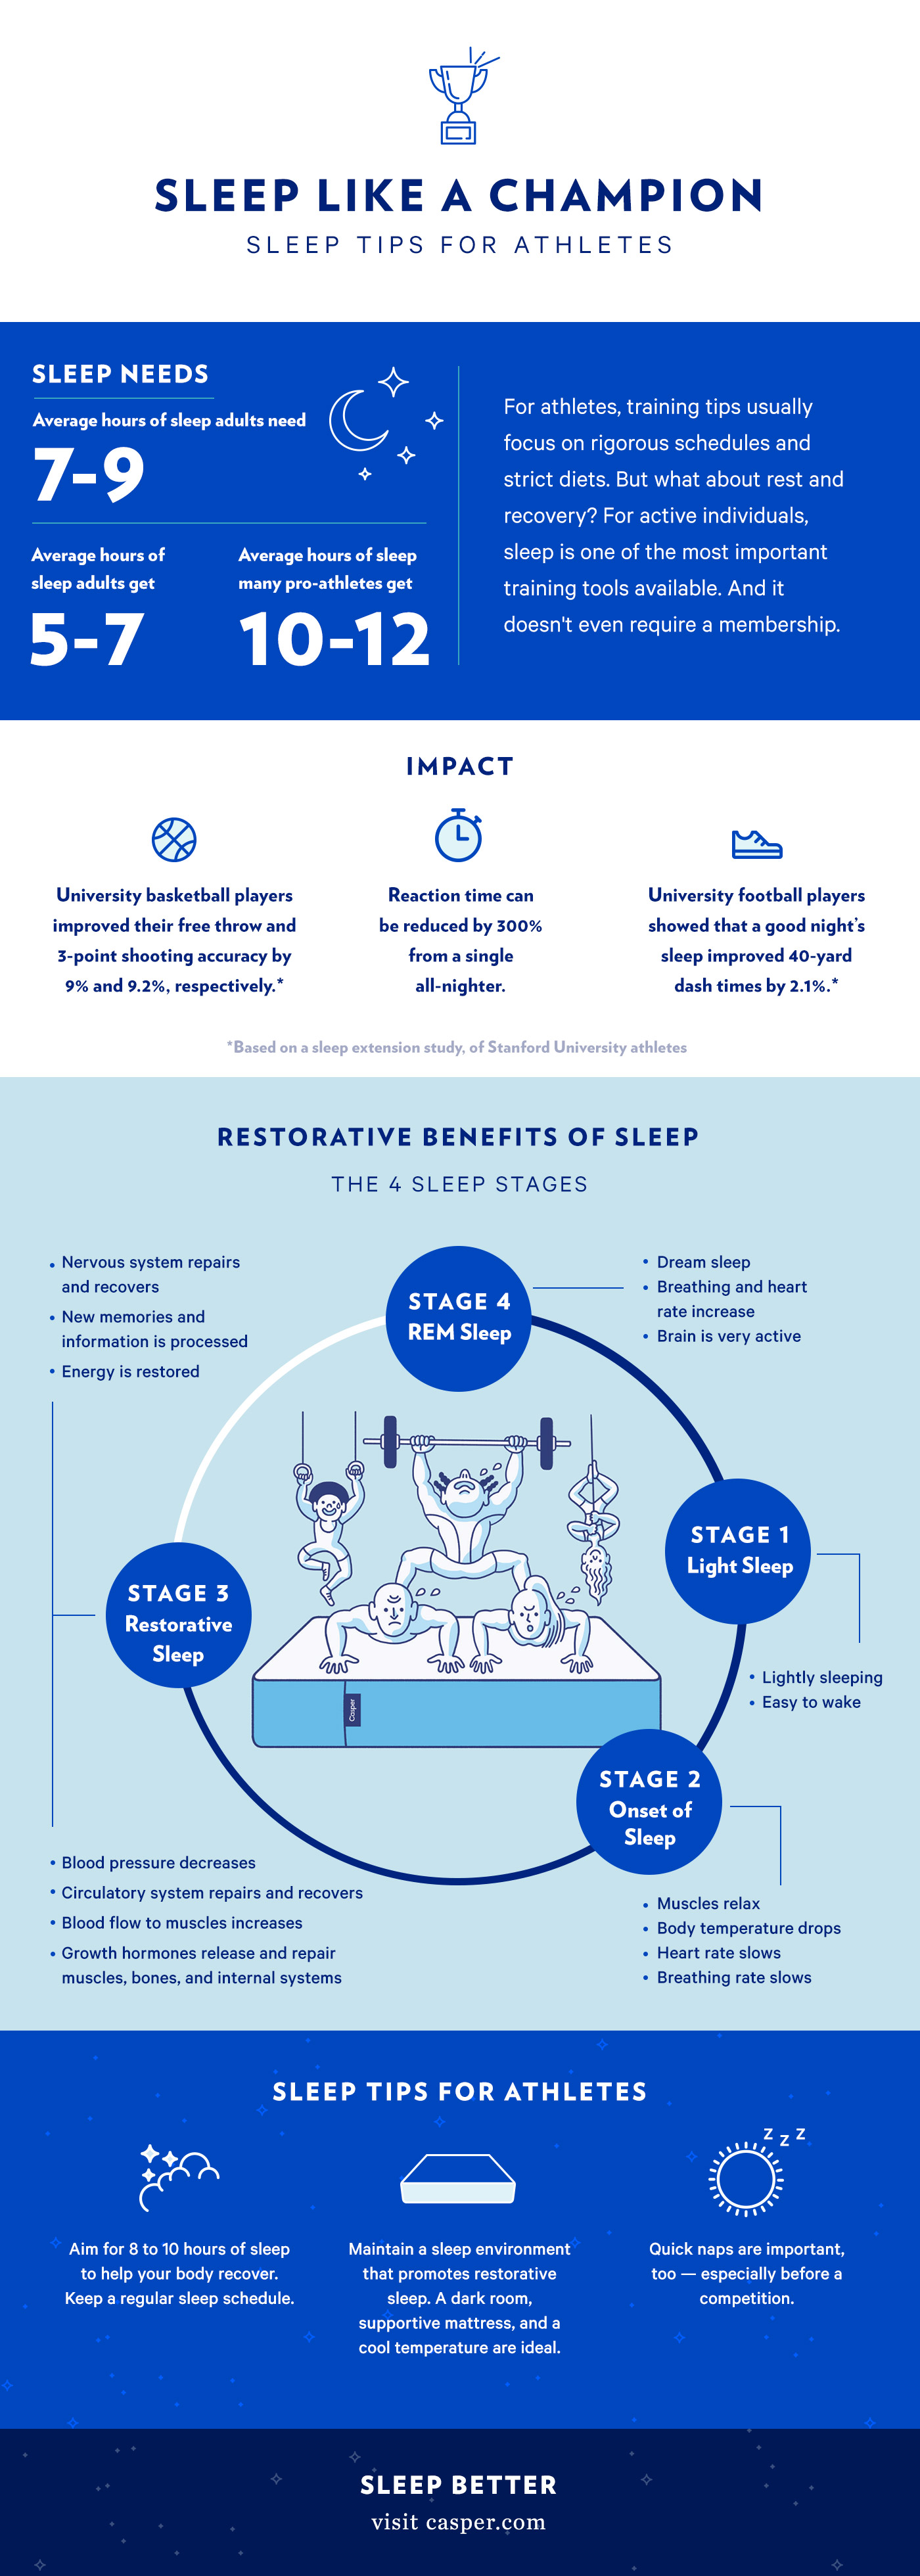 rest more to achieve optimal physical performance